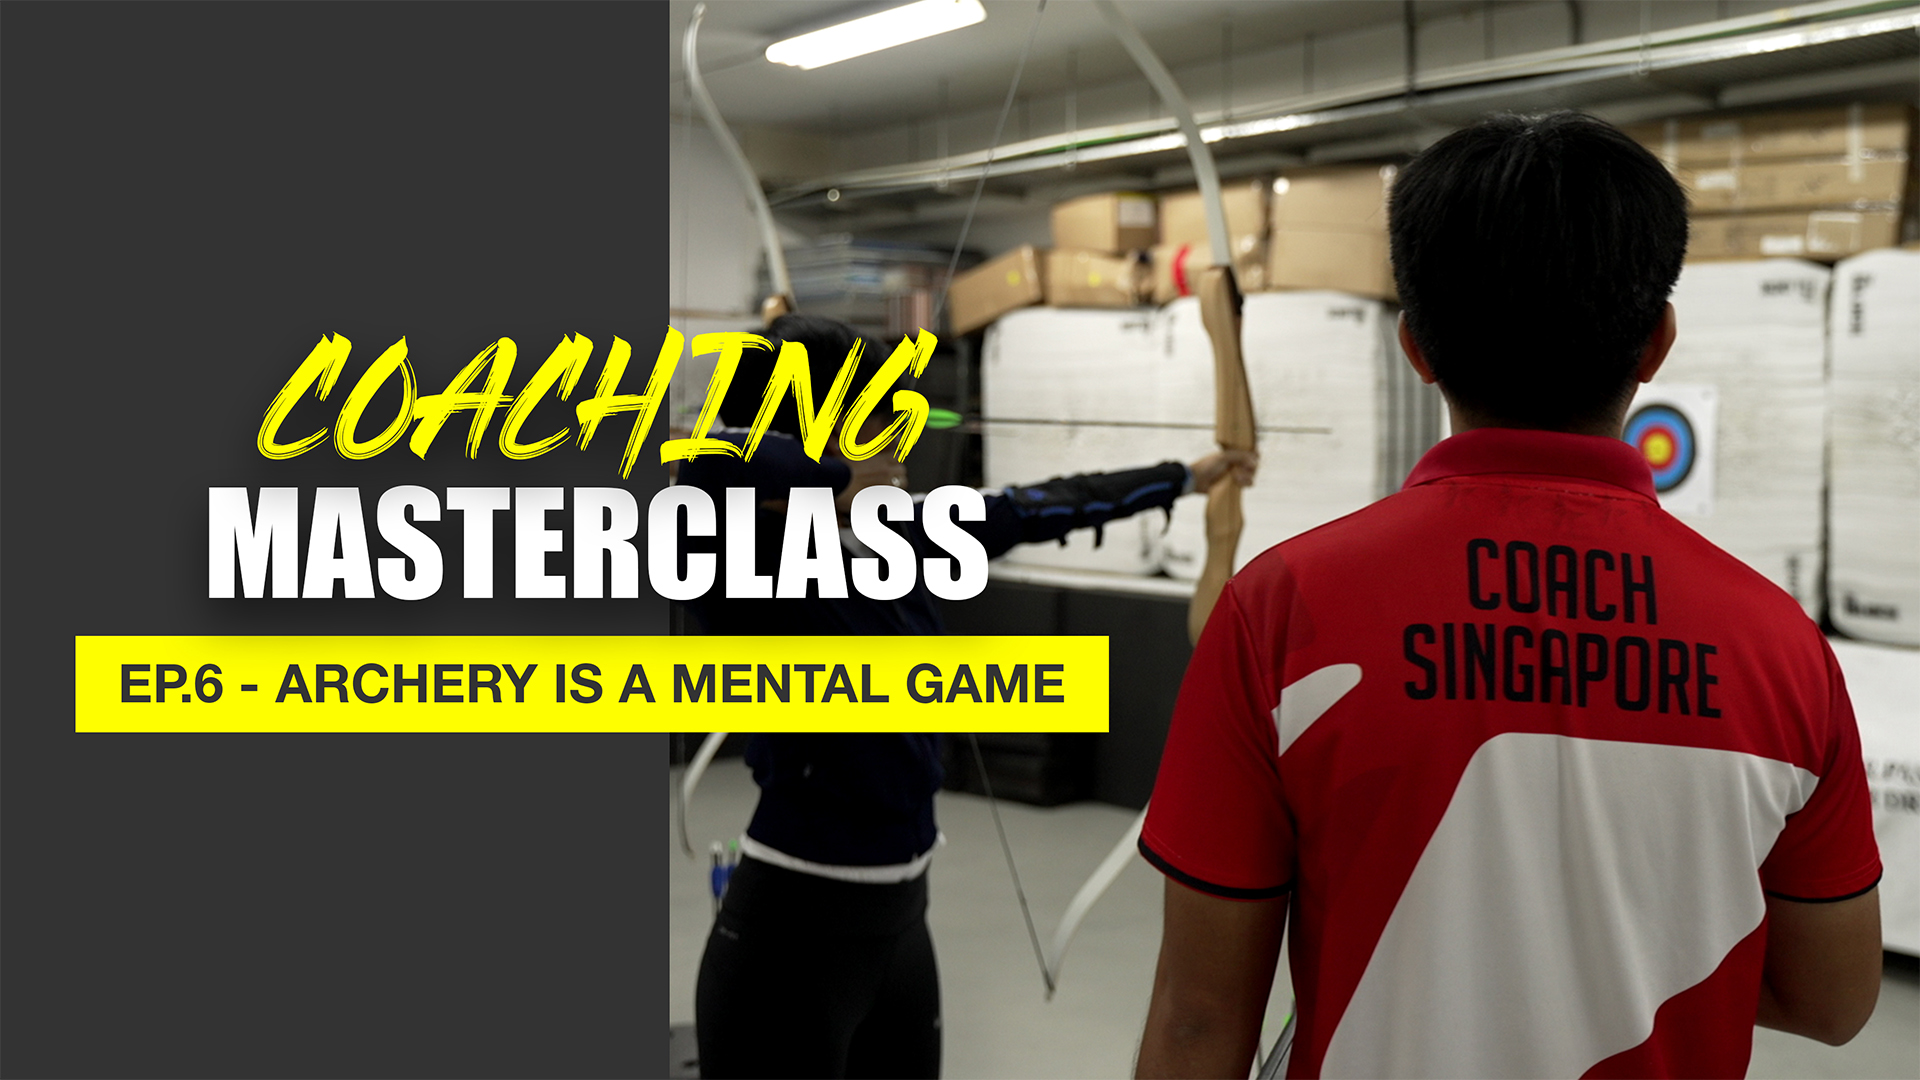 Coaching Masterclass (Archery) Ep 6 - Archery is a Mental Game